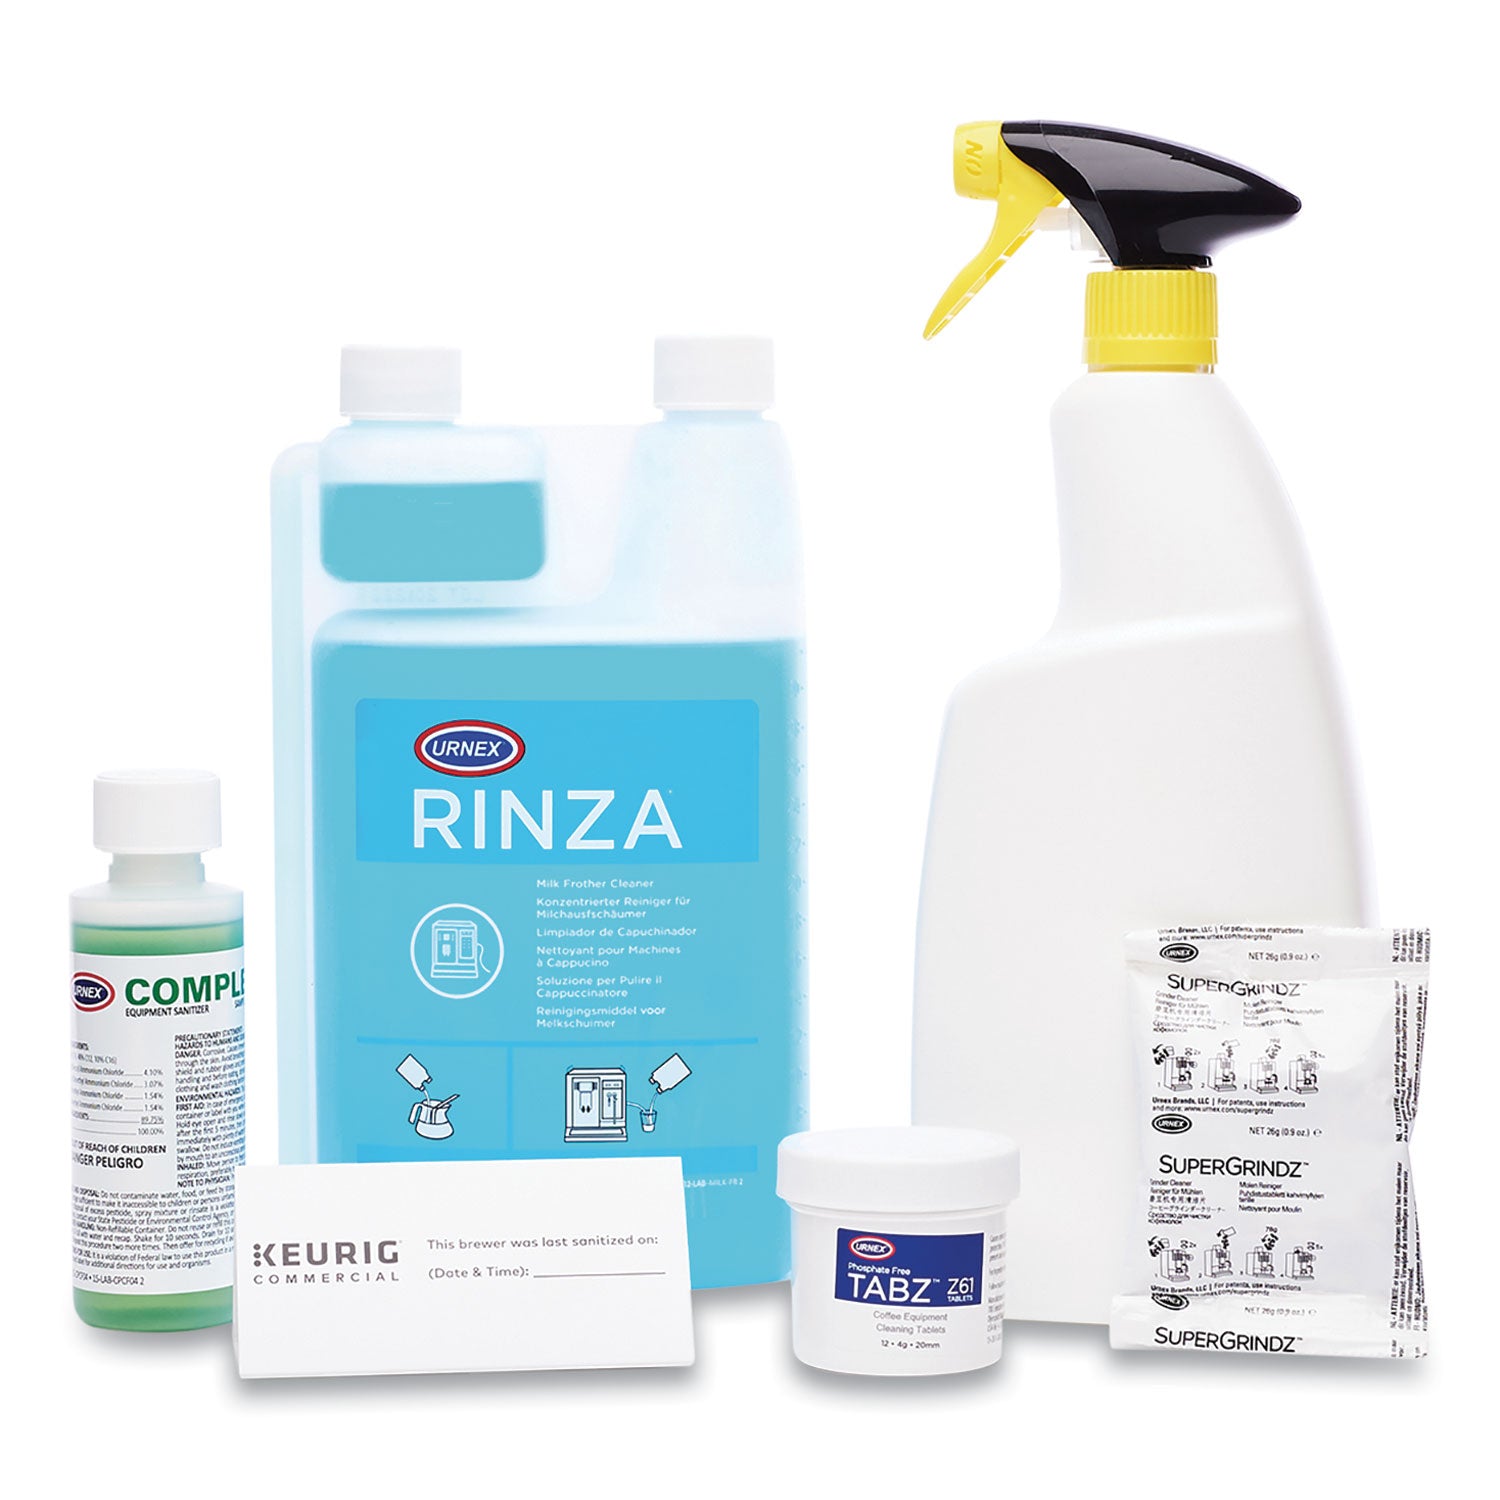 bean-to-cup-brewer-deep-cleaning-kit-4oz-complete-cafe-3-32oz-rinza-12tabz-z61-3-supergrindz-a01-spray-bottle_gmt5000359701 - 1